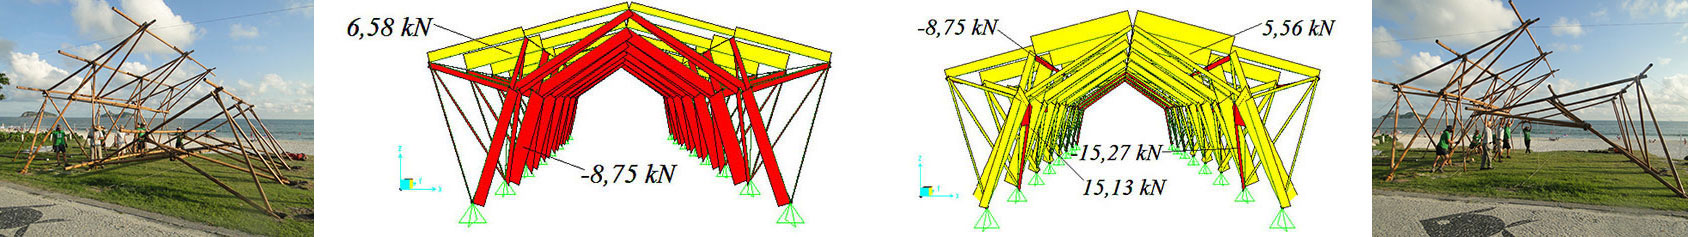 1-design-and-analysis-of-a-bamboo-roof-structure-Journal-of-International-Association-for-Shell-and-Spatial-Structures.jpg